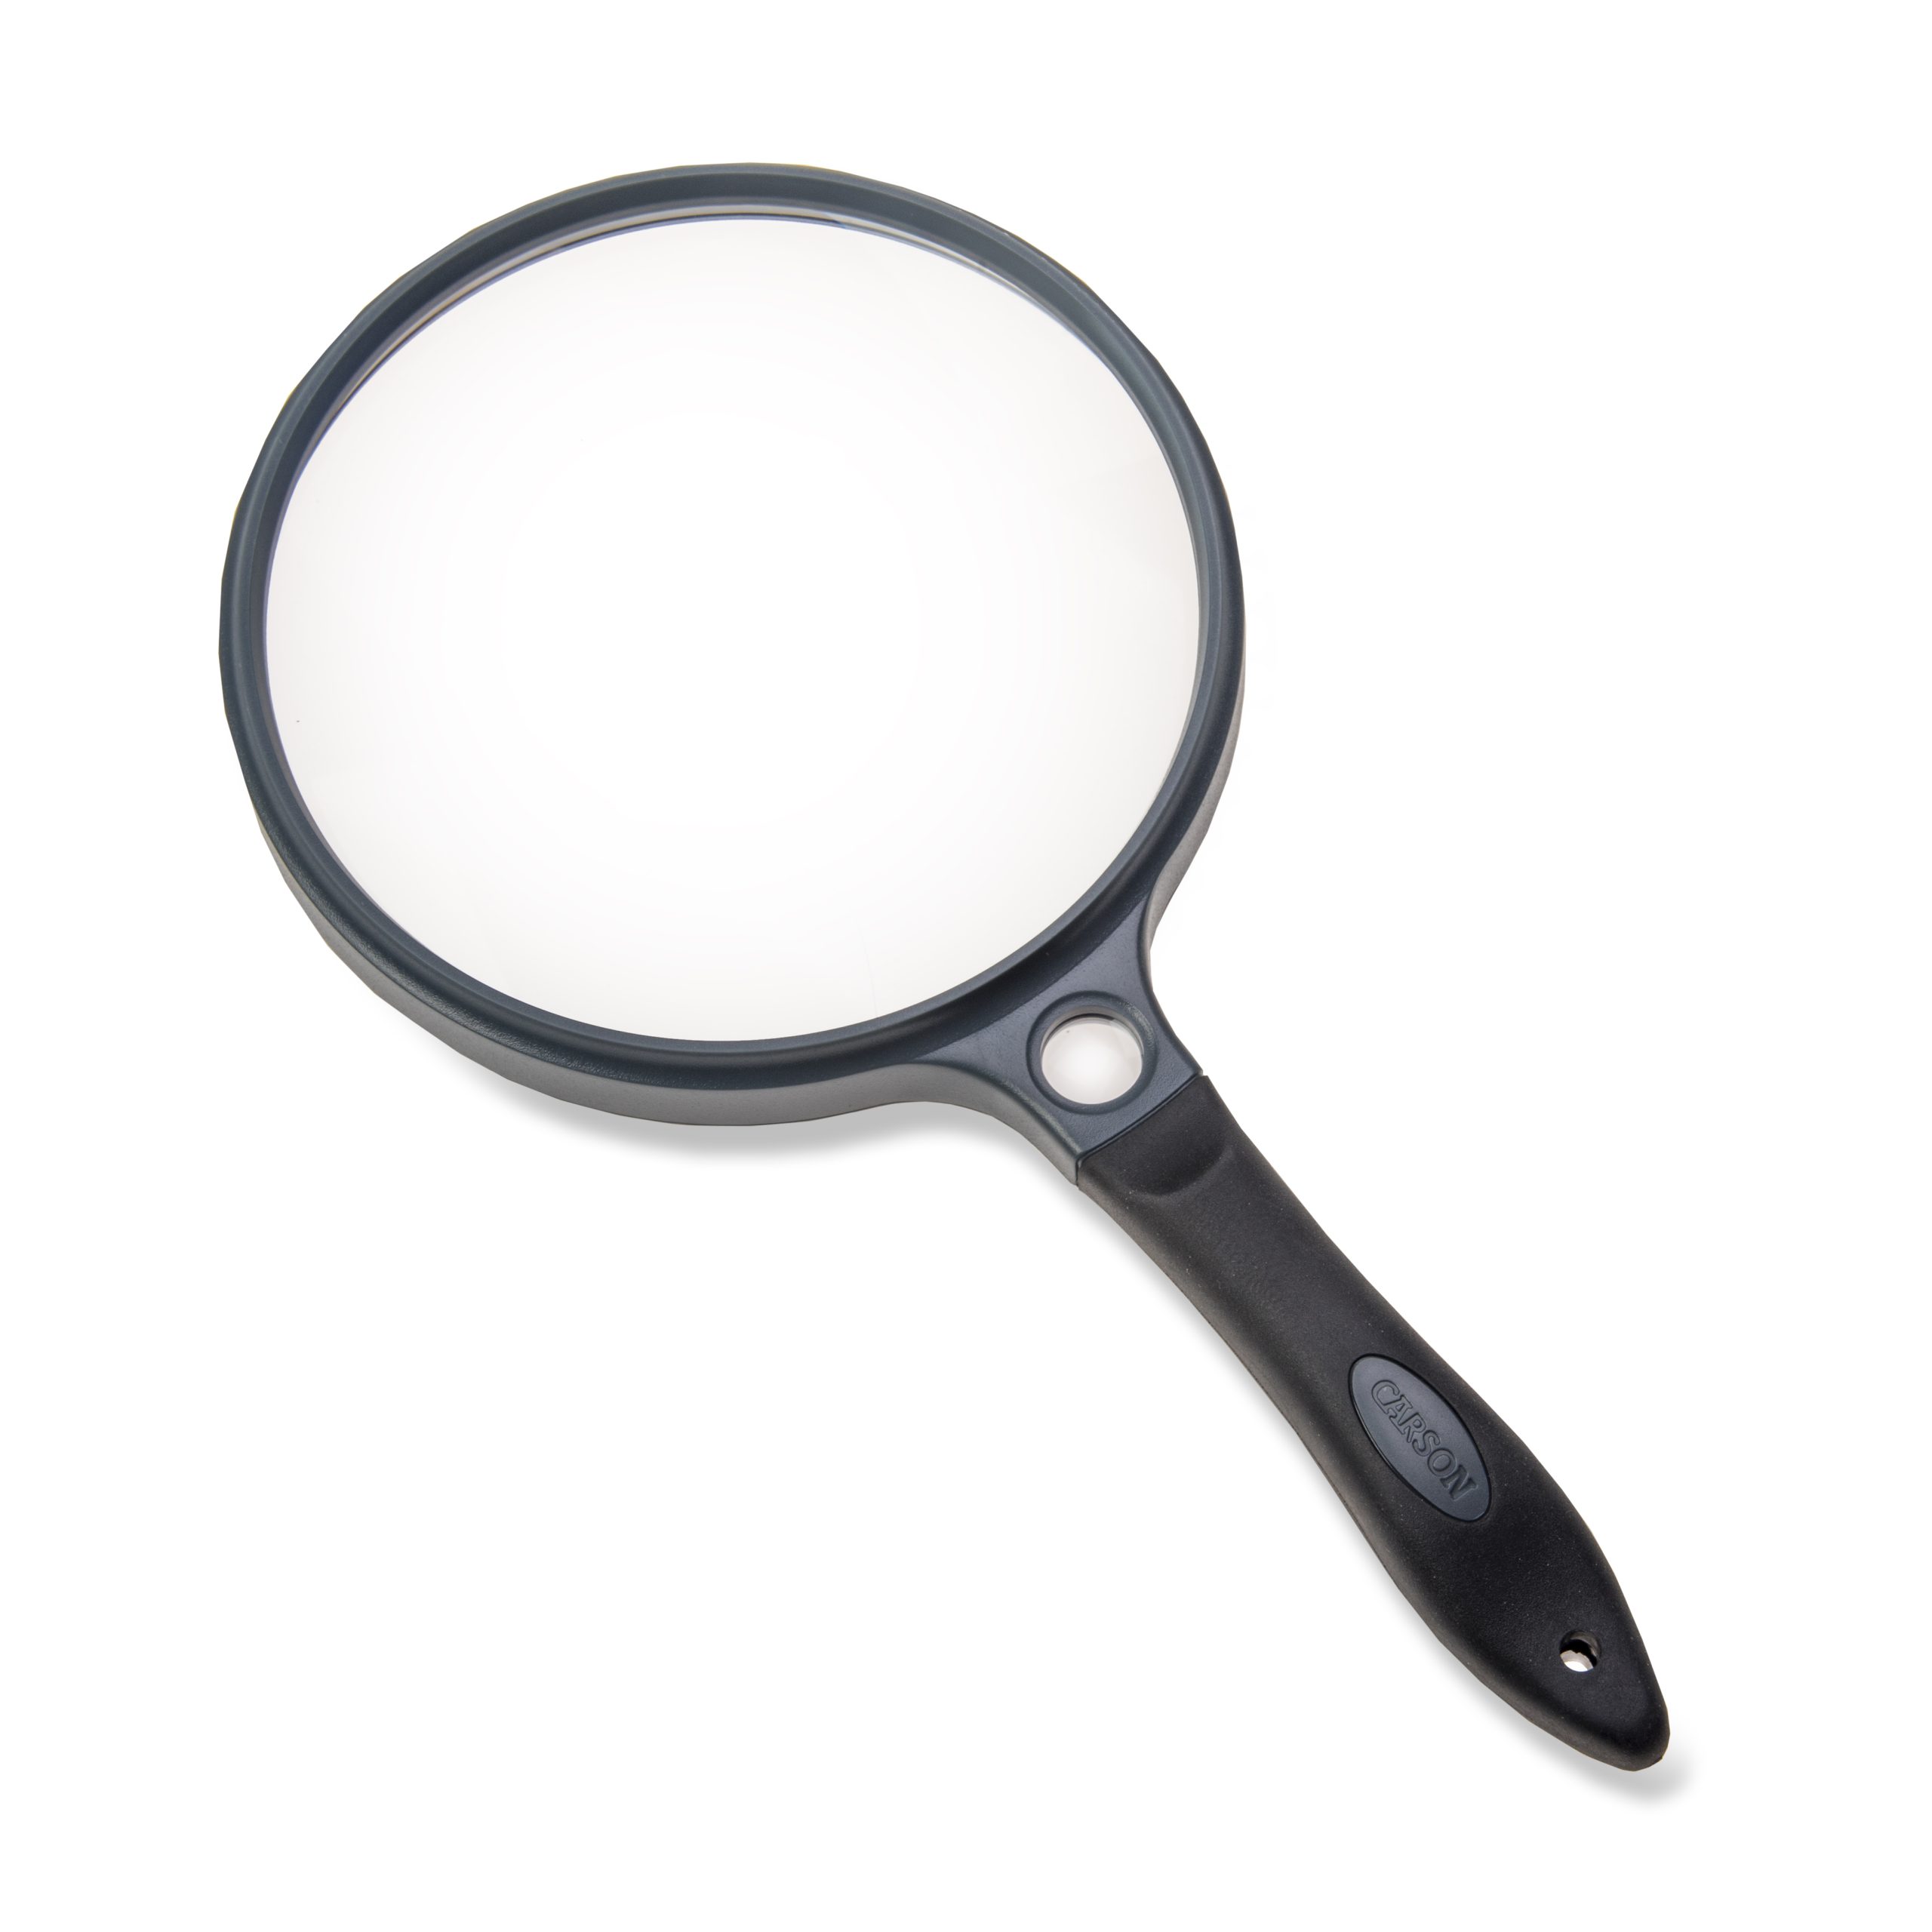 4 Glass lens soft handled 2x reading and Inspection Magnifier ideal for  general inspection and reading